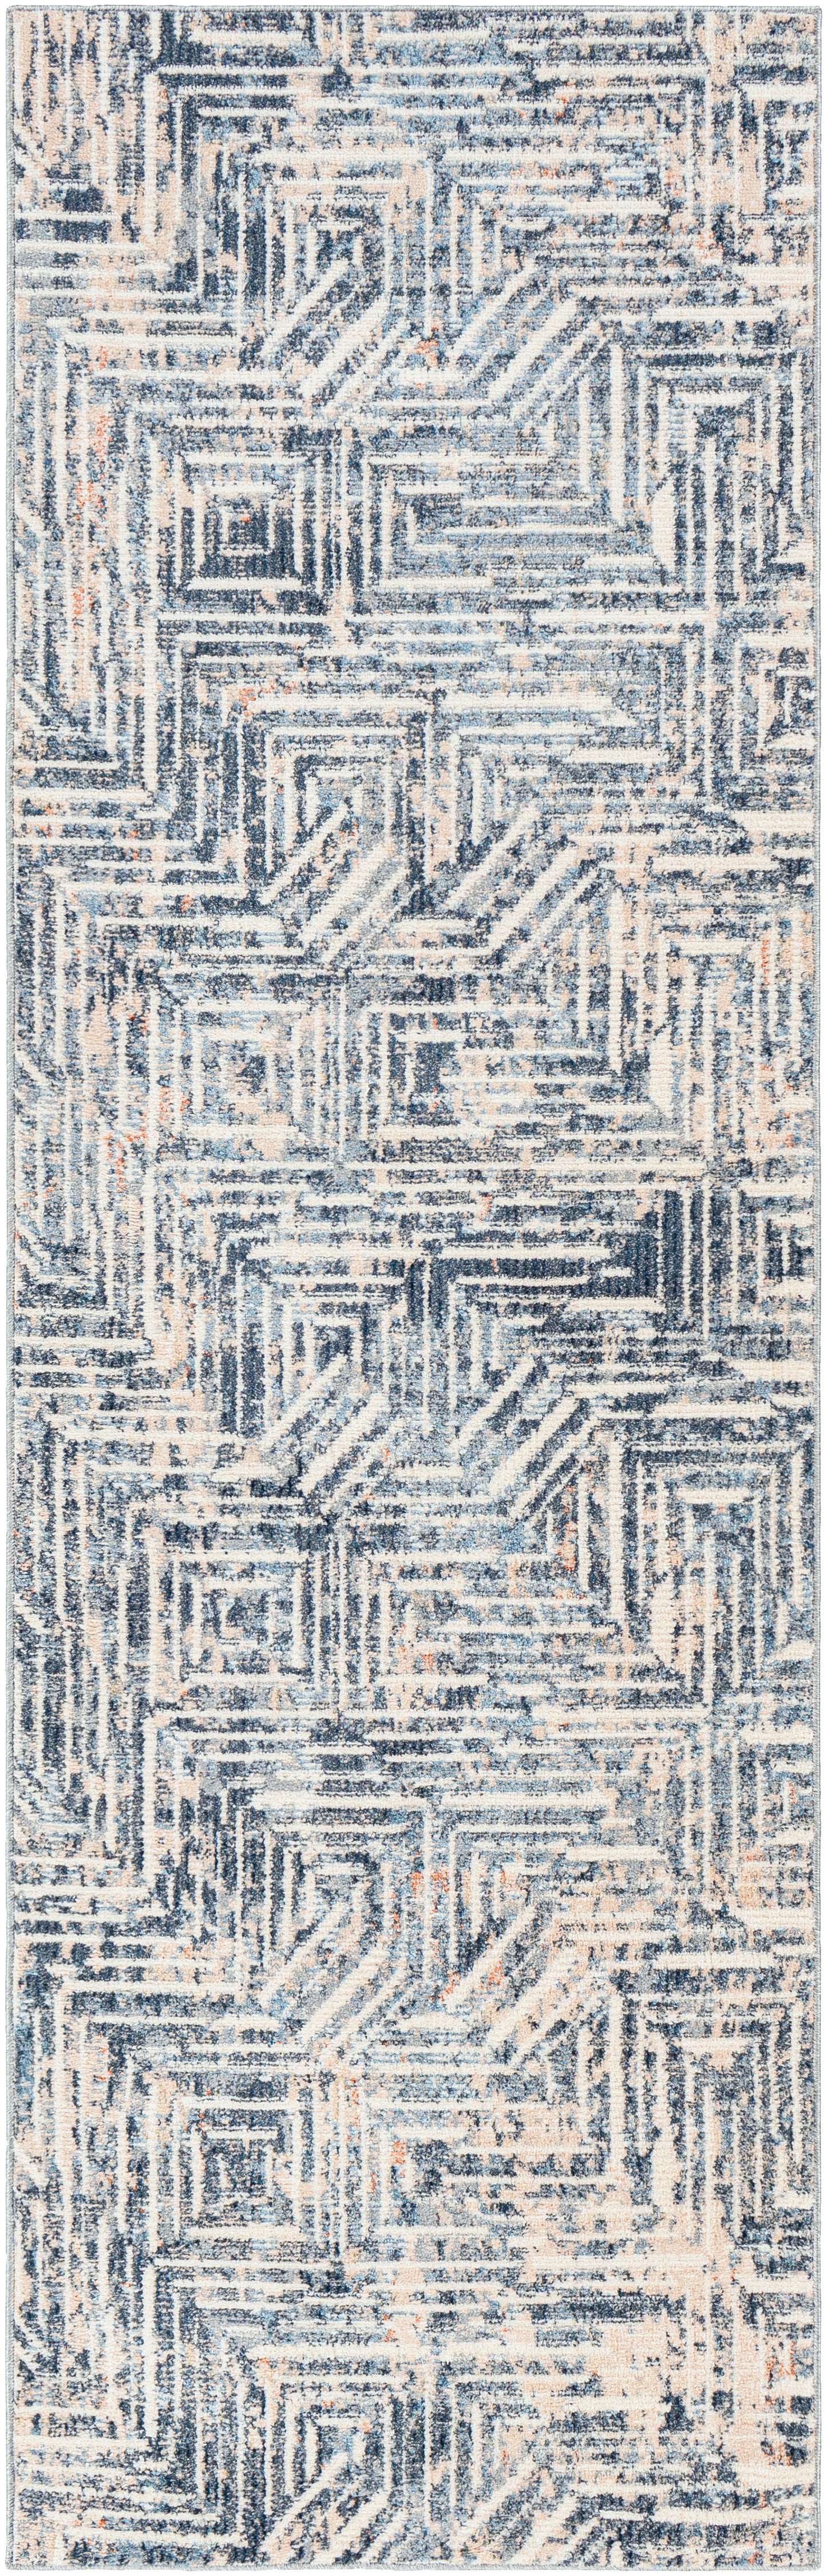 Amore 30400 Machine Woven Synthetic Blend Indoor Area Rug by Surya Rugs